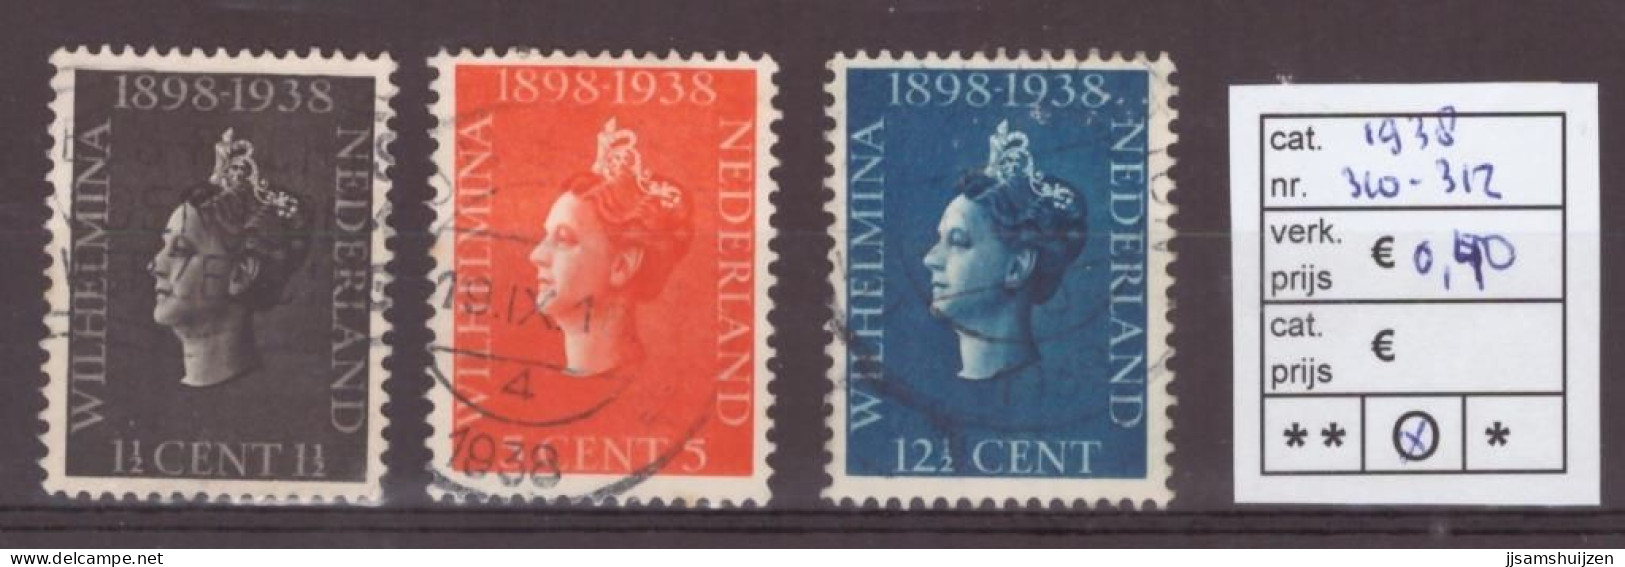 Netherlands Stamps Used 1938,  NVPH Number 310-312, See Scan For The Stamps - Gebruikt